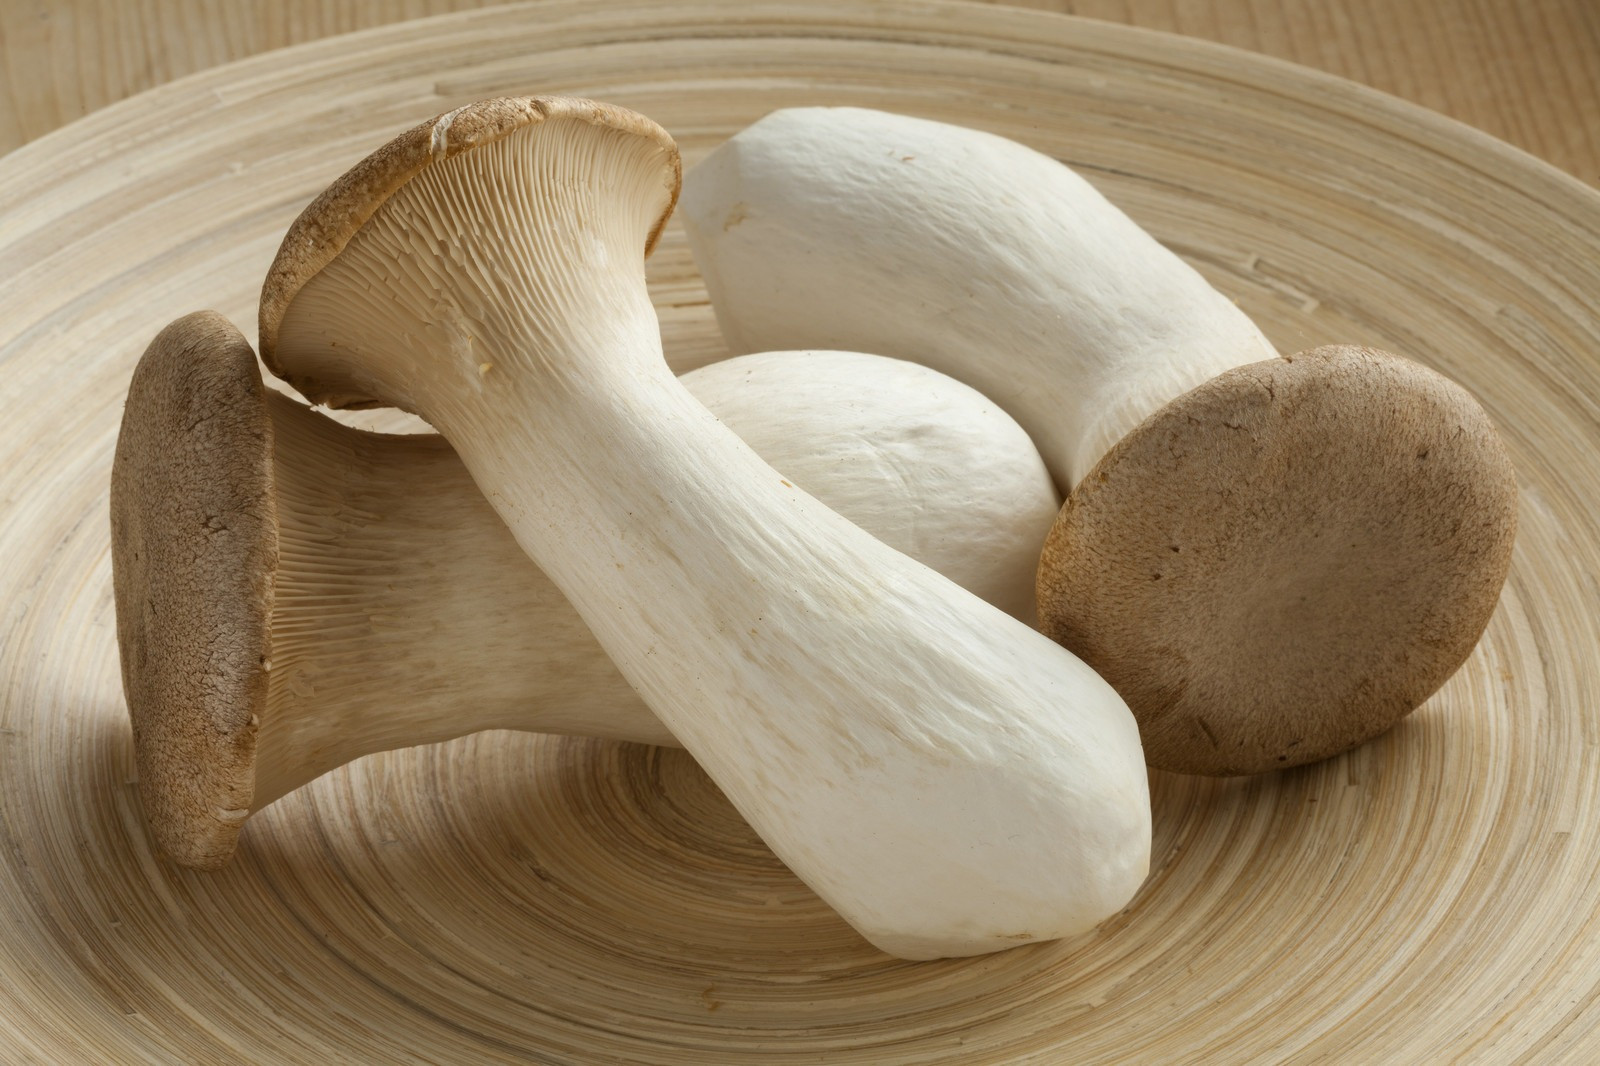 King Oyster Mushrooms
 King Oyster